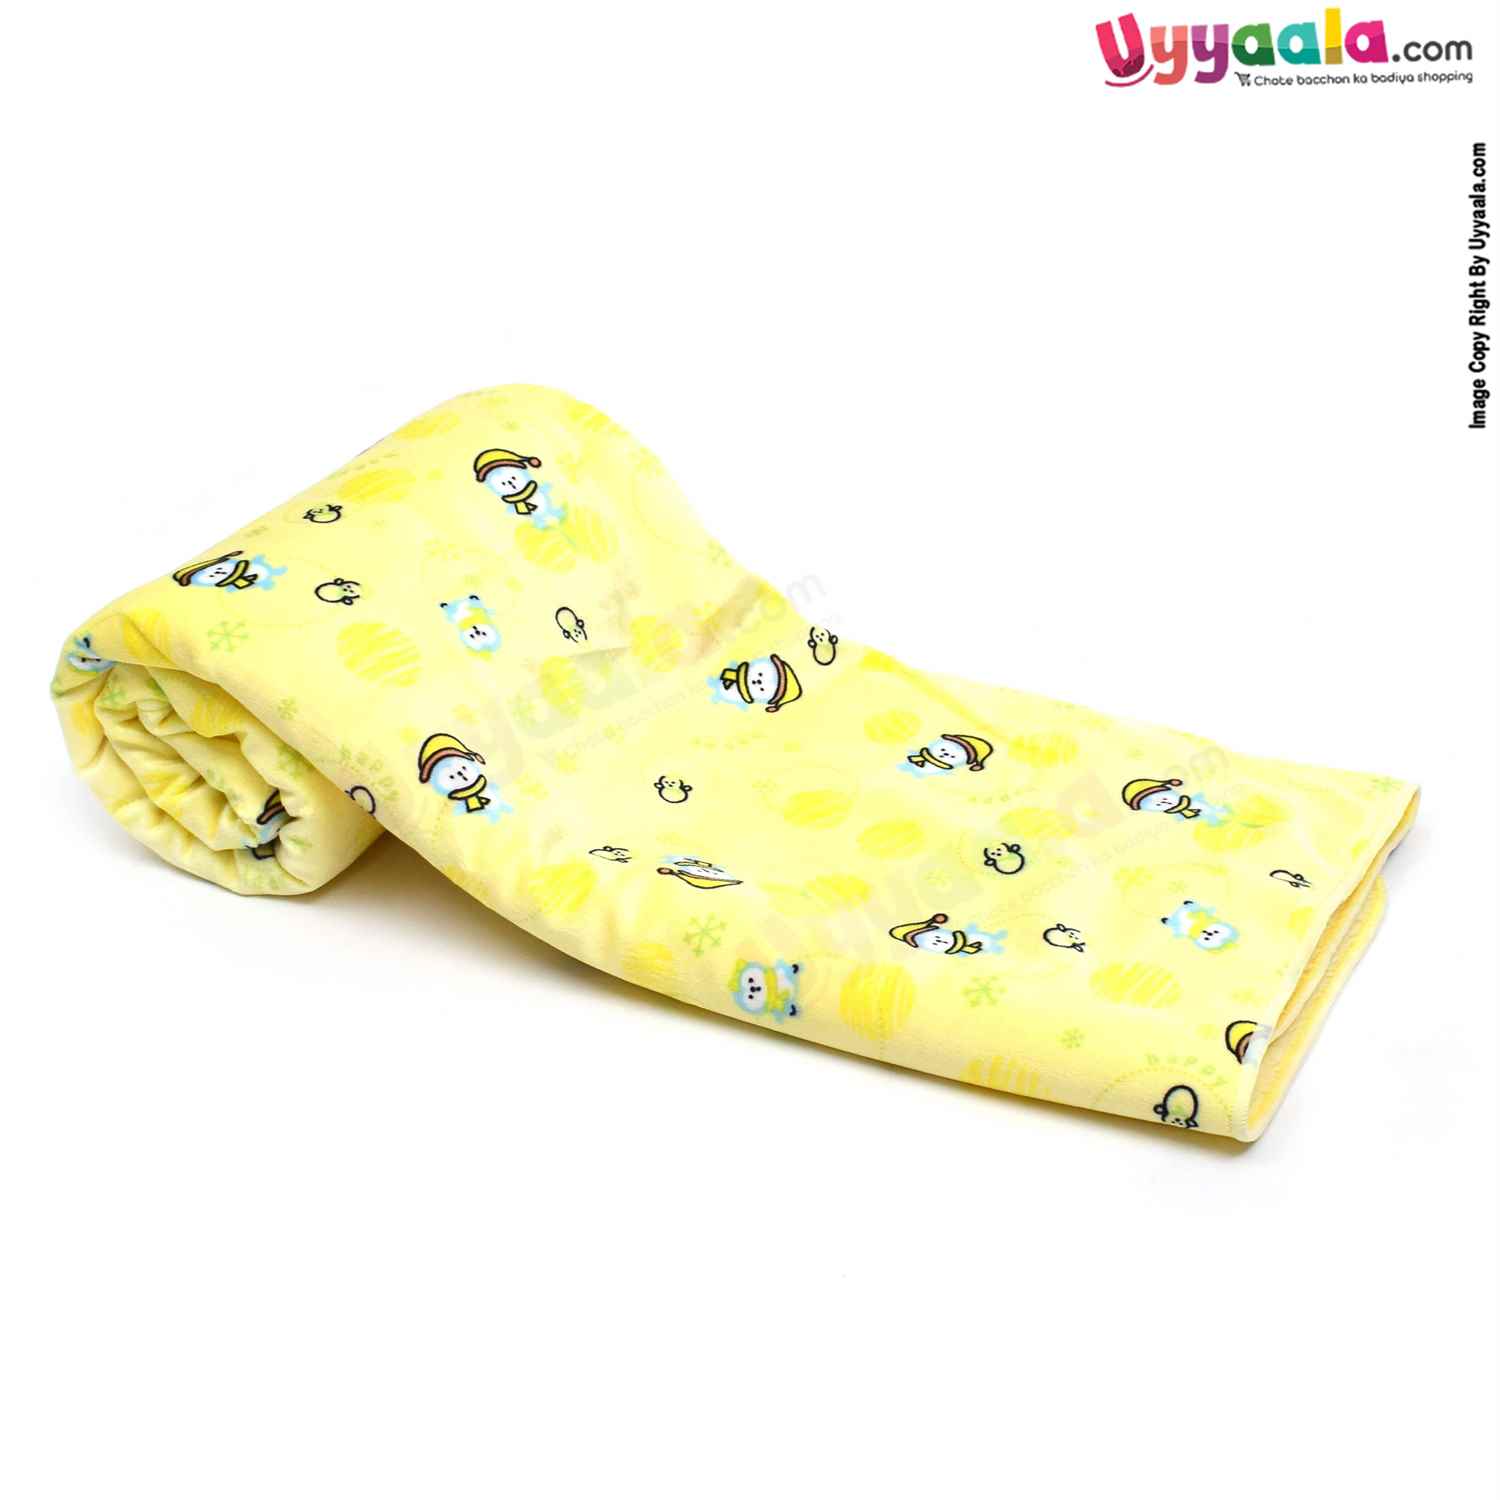 Super Soft Double Layered Blanket One Side Fur & Other Side Velvet, with Snow Man Print 0-24m Age, Size (101*73Cm)-Yellow